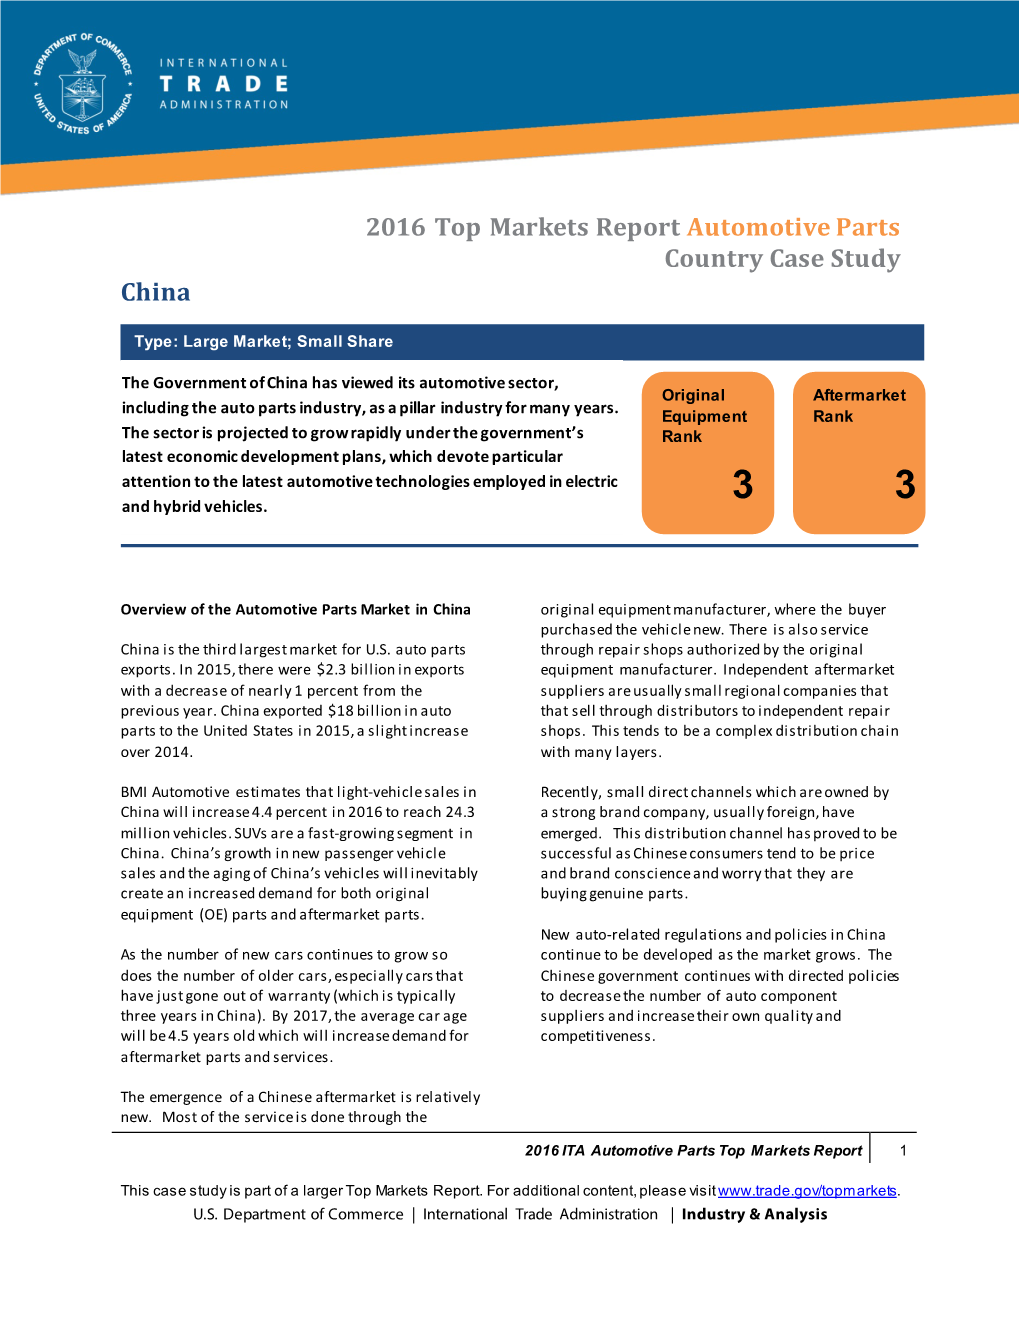 2016 Top Markets Report Automotive Parts Country Case Study China